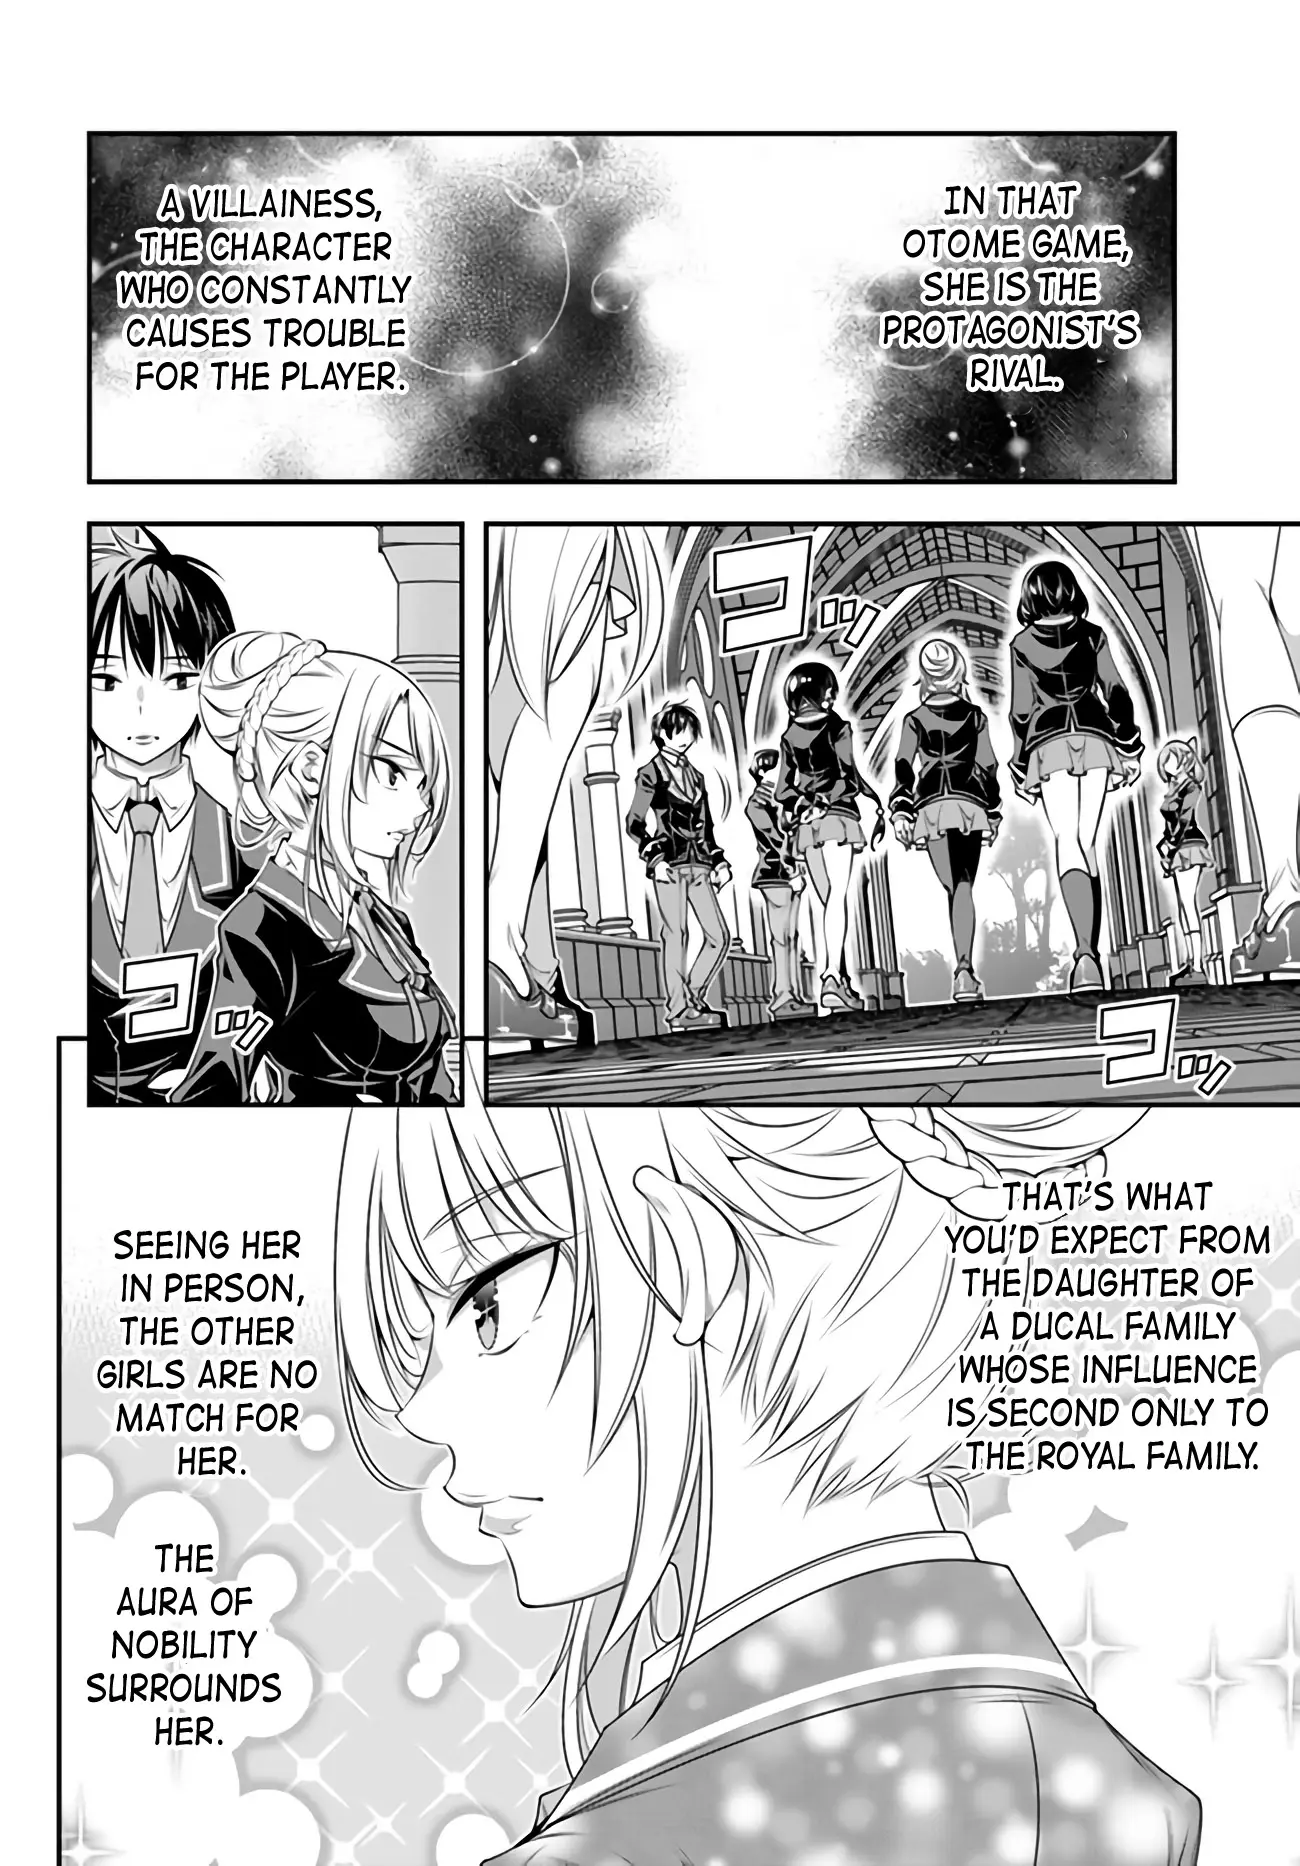 The World Of That Otome Game Is Tough For Us - 6 page 9-985b3202